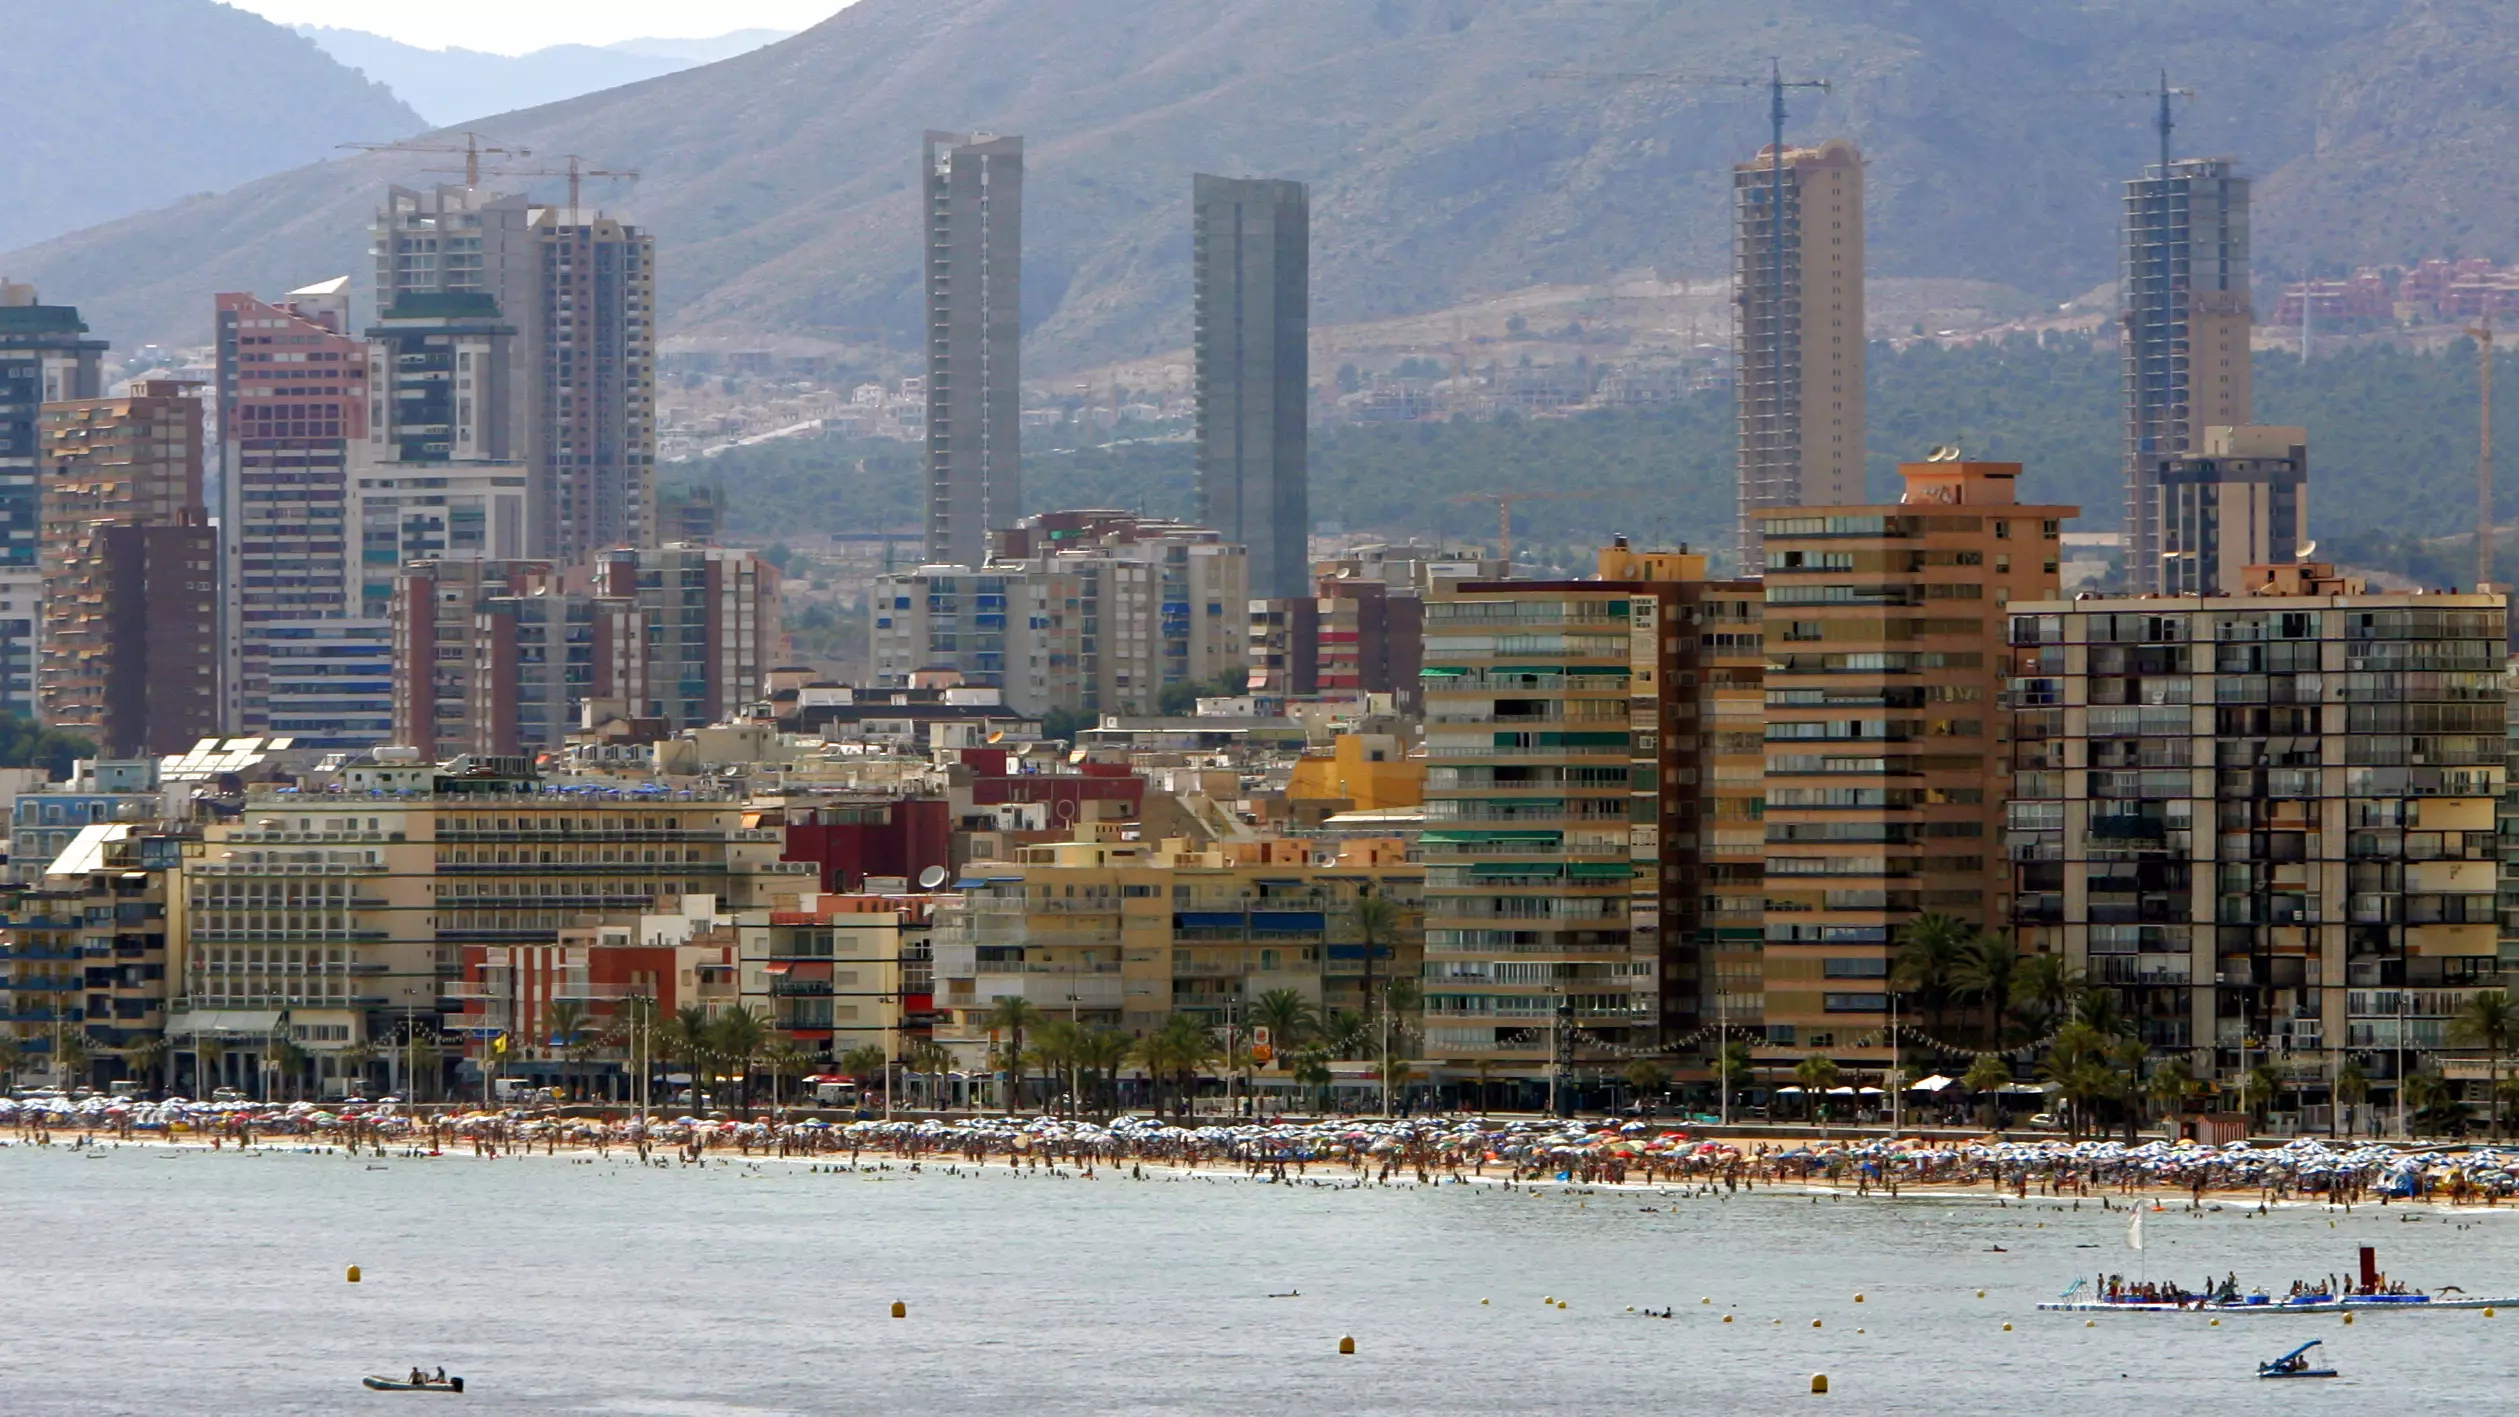 Gangs In Benidorm Are Spiking Drinks And Robbing Tourists